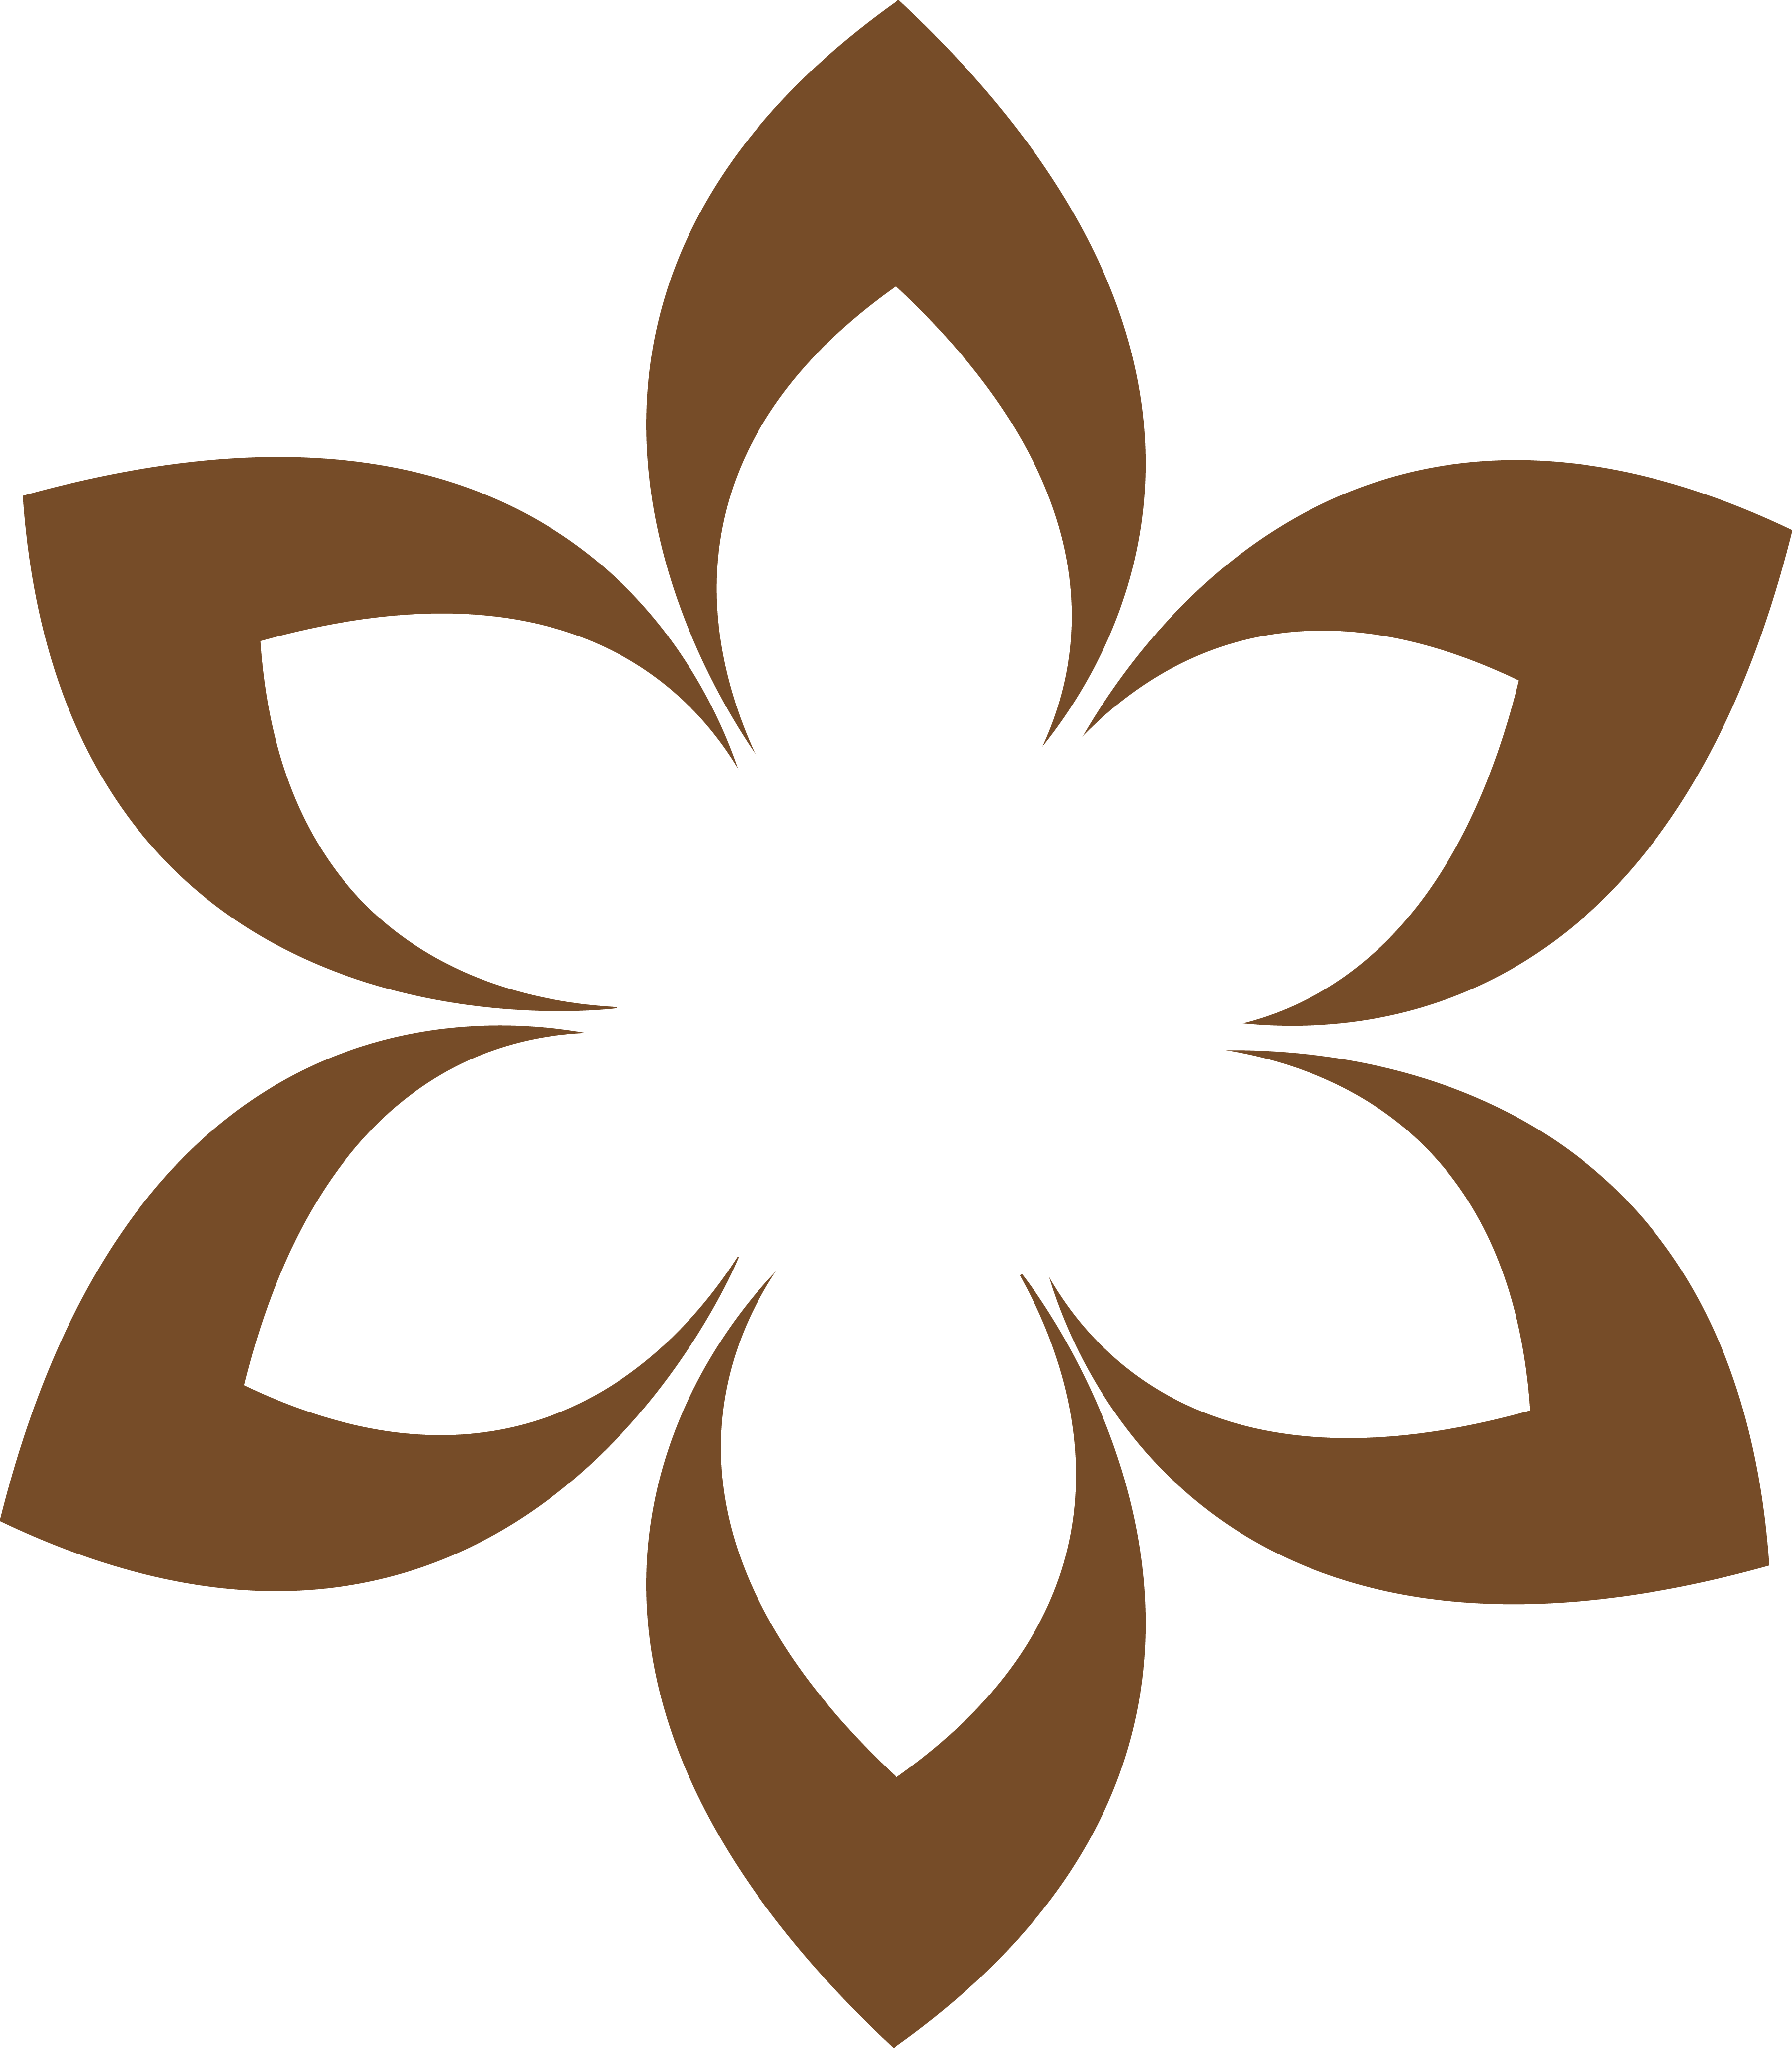 3610 X 4125 9 - Flower Symbols In Png (3610x4125)